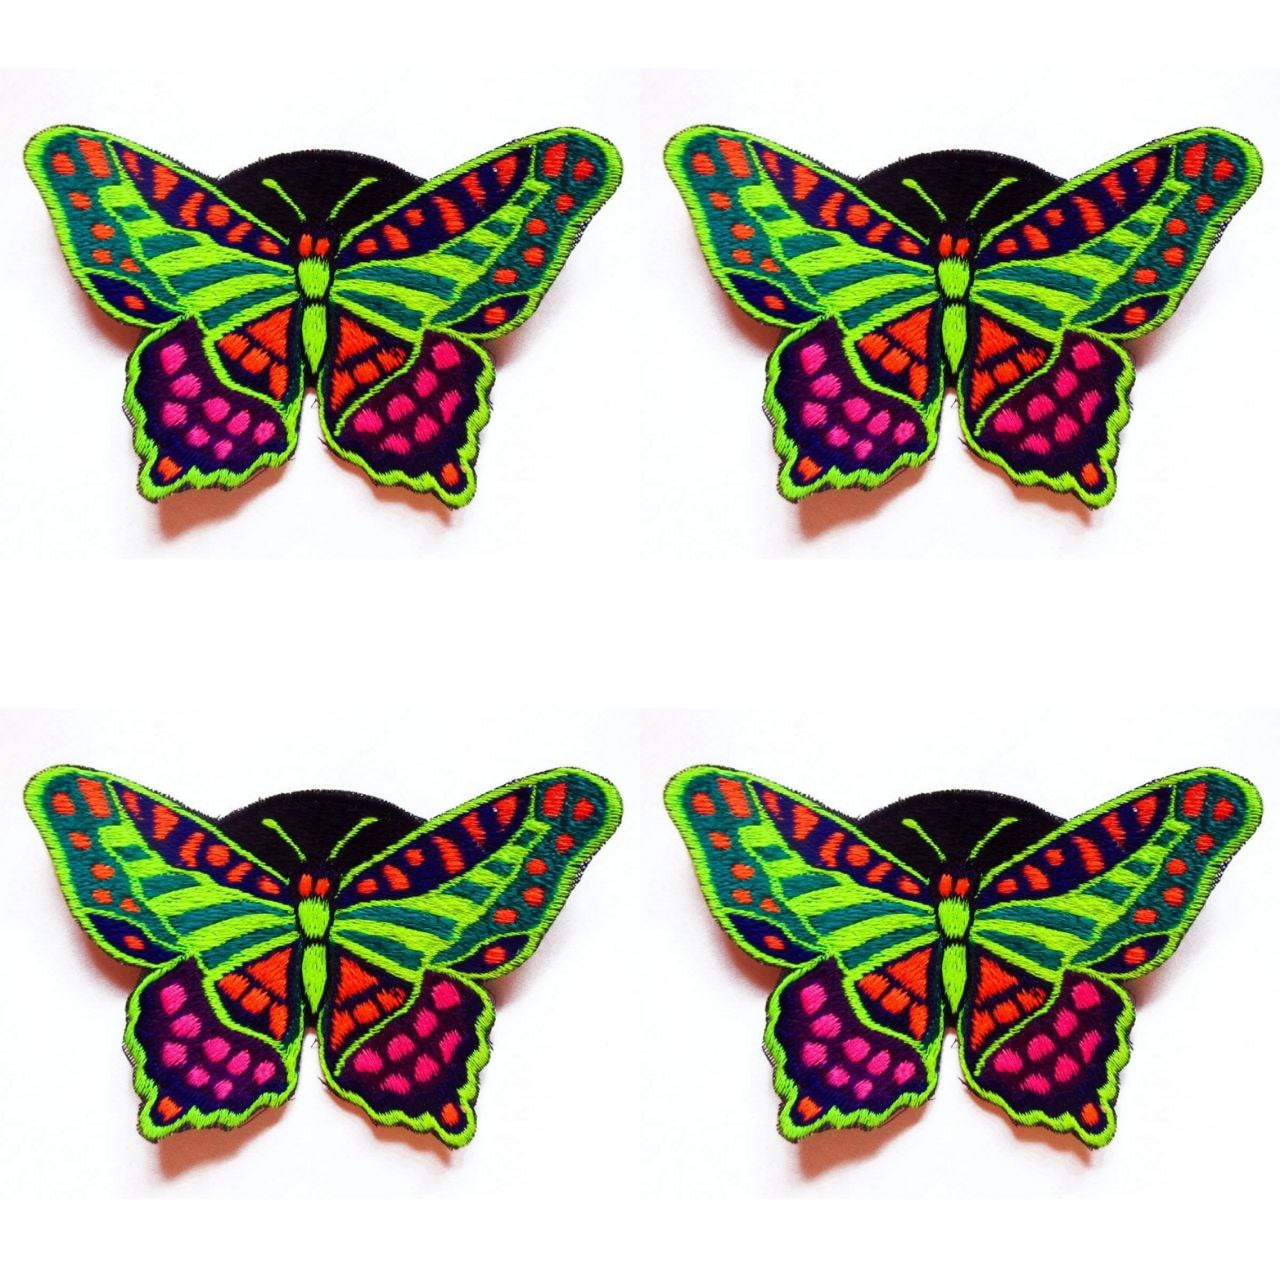 Beautiful Butterfly embroidery patch 11x7cm size Hippie Goa Trance Blacklight UV glowing handmade for sewing on or simply with textile glue